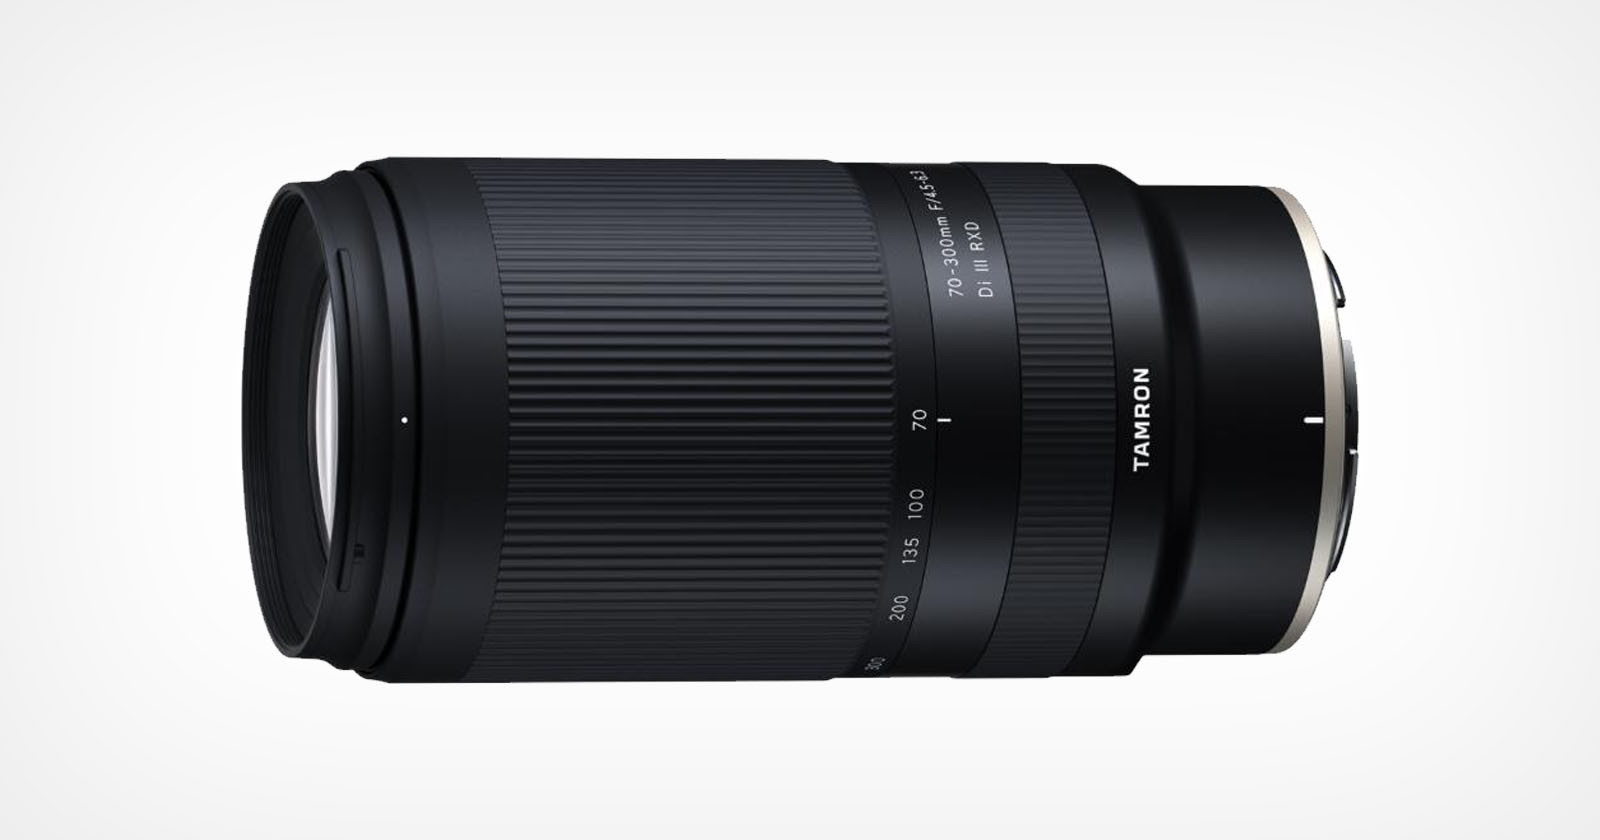 Tamron is Developing a 70-300mm f/4.5-6.3 for Nikon Z Mount